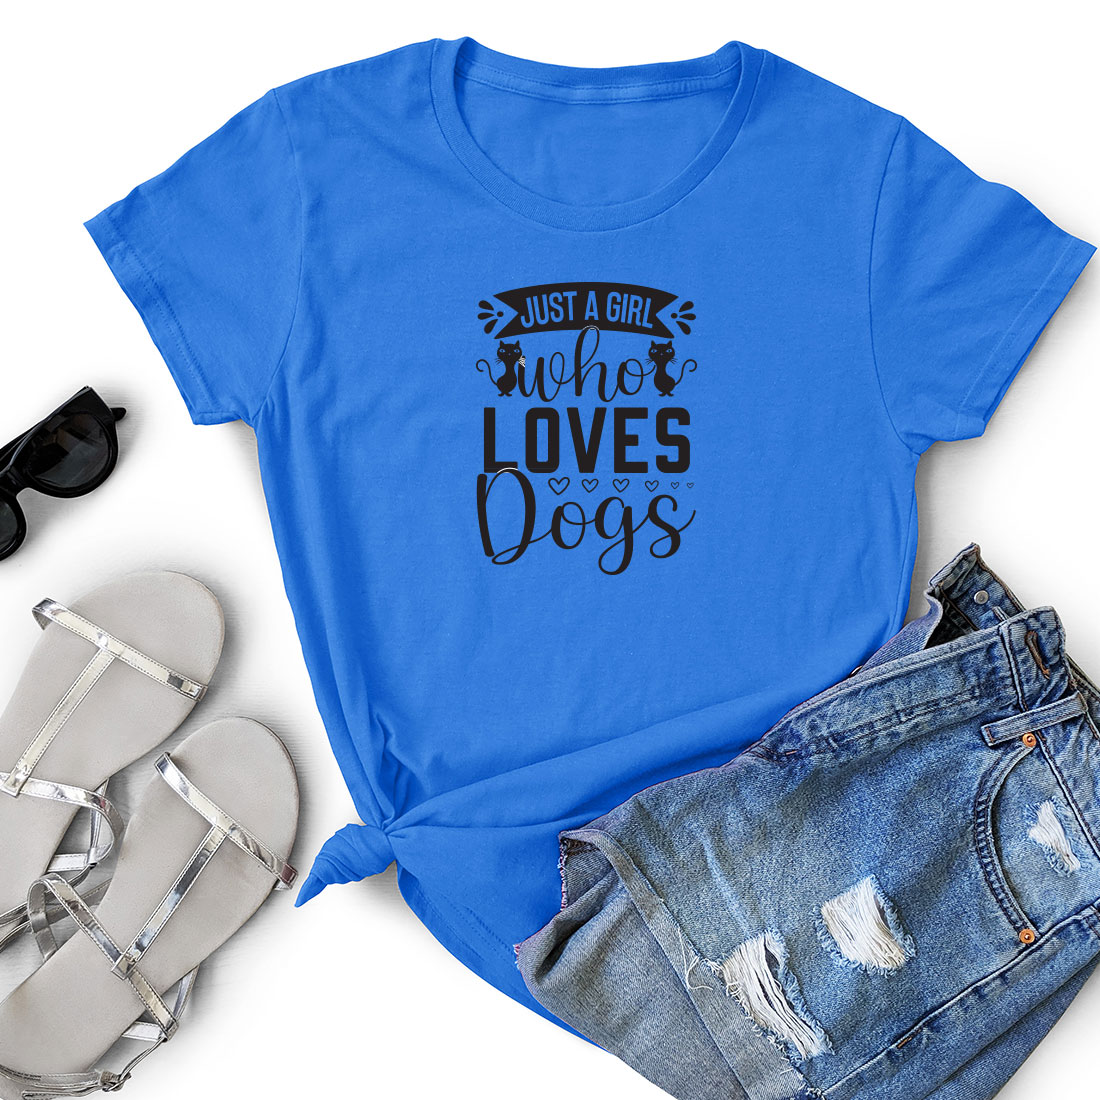 T - shirt that says just a girl who loves dogs.